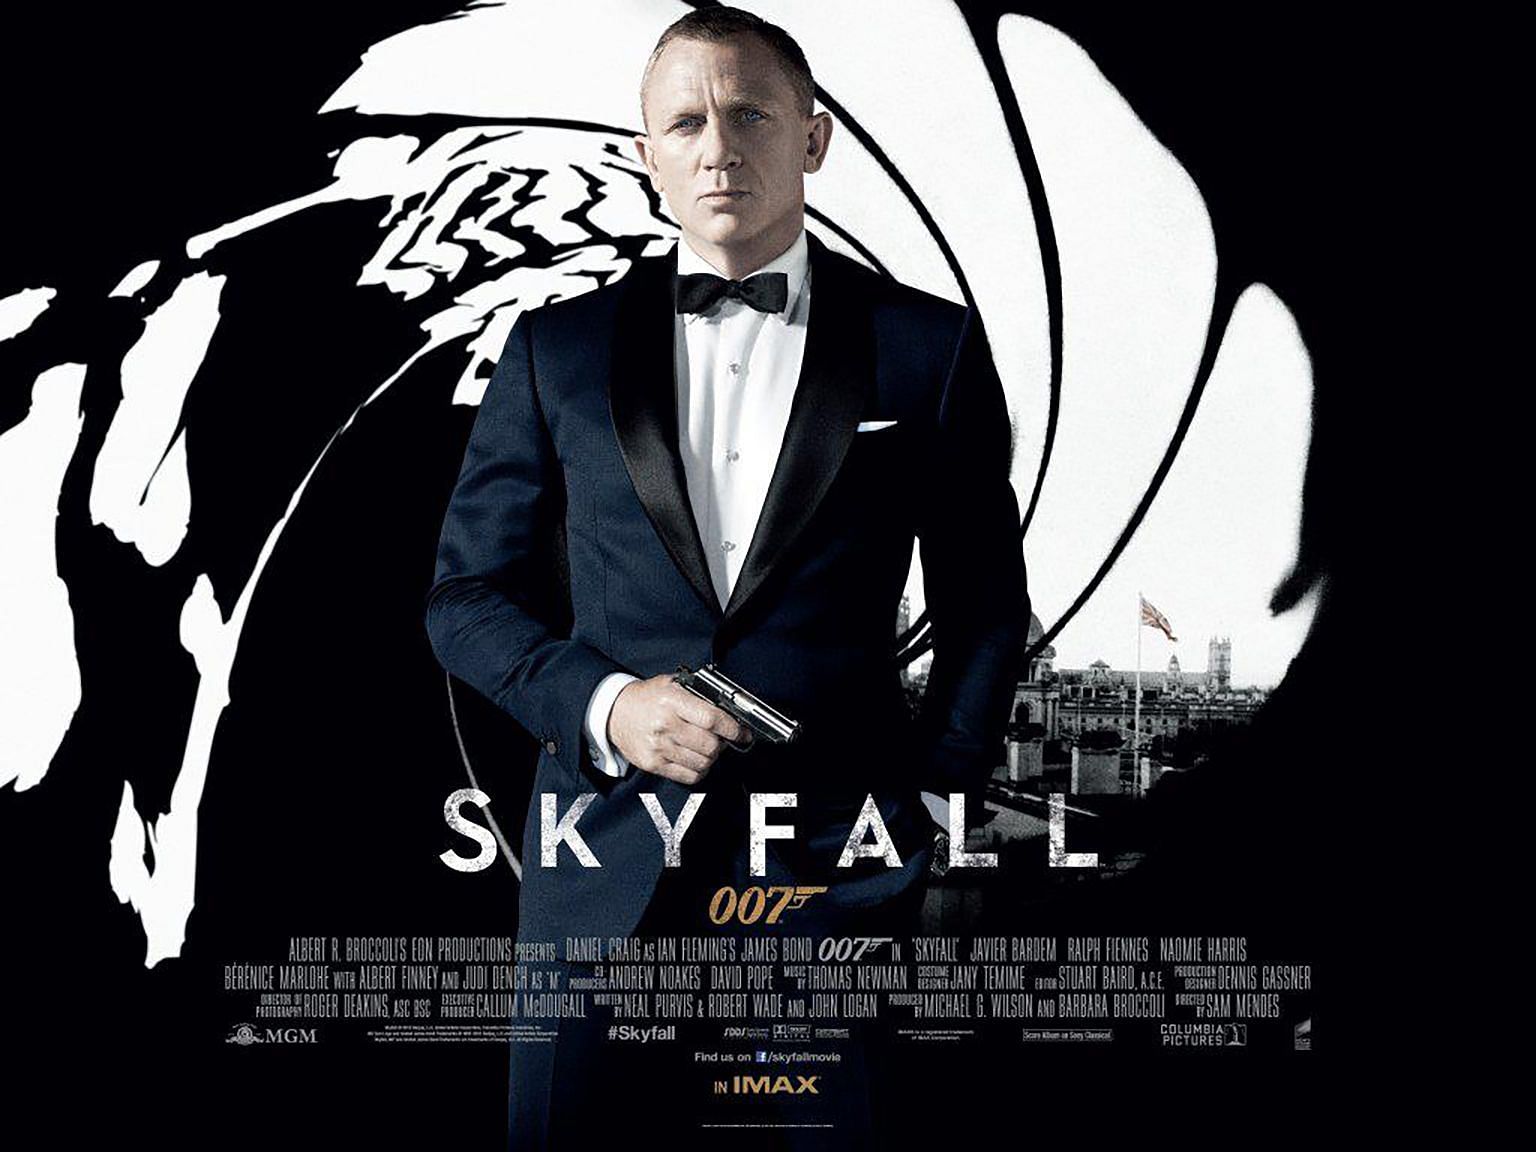 Skyfall (Image via Columbia Pictures)